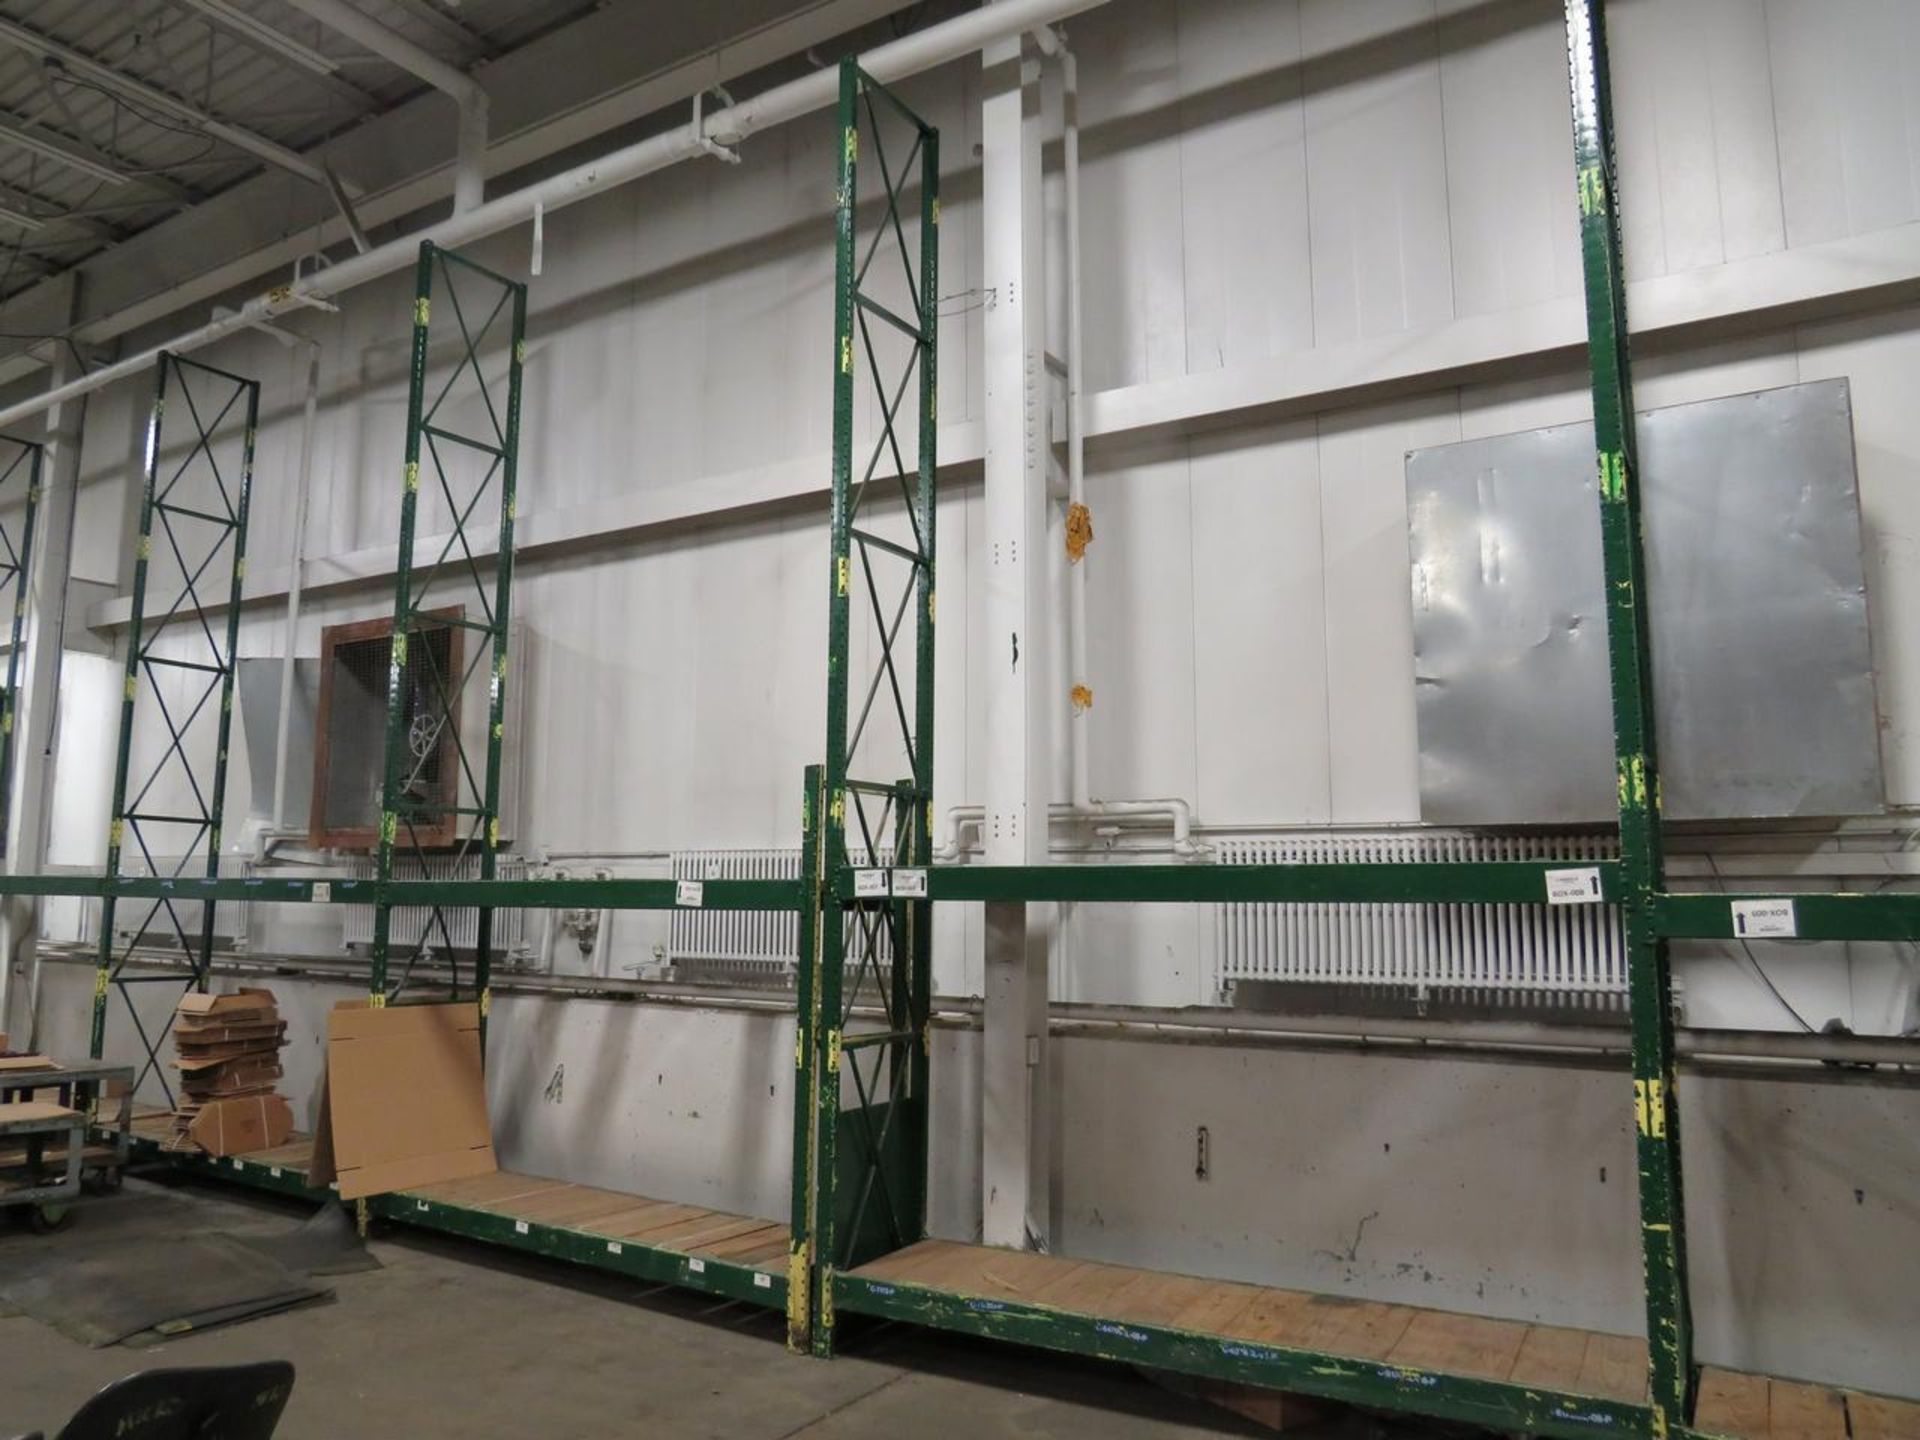 7-Sections of Pallet Racking - Image 4 of 6